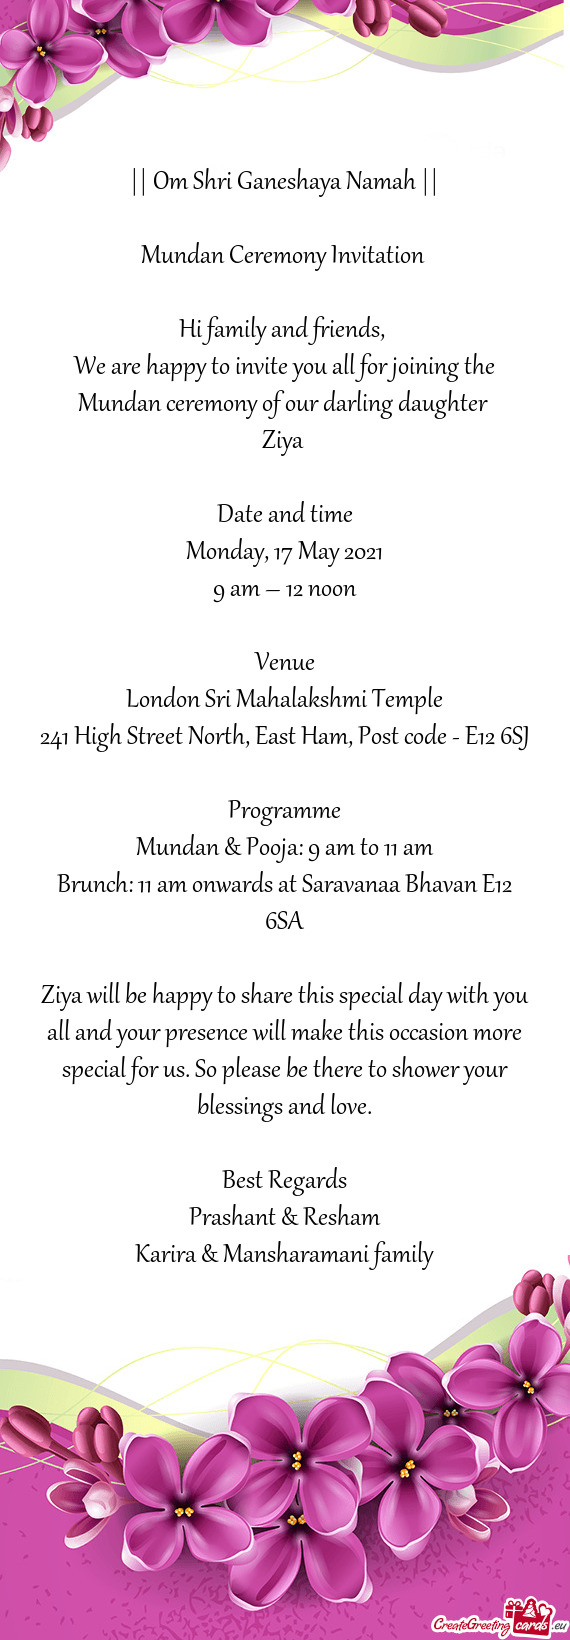 Ziya will be happy to share this special day with you all and your presence will make this occasion